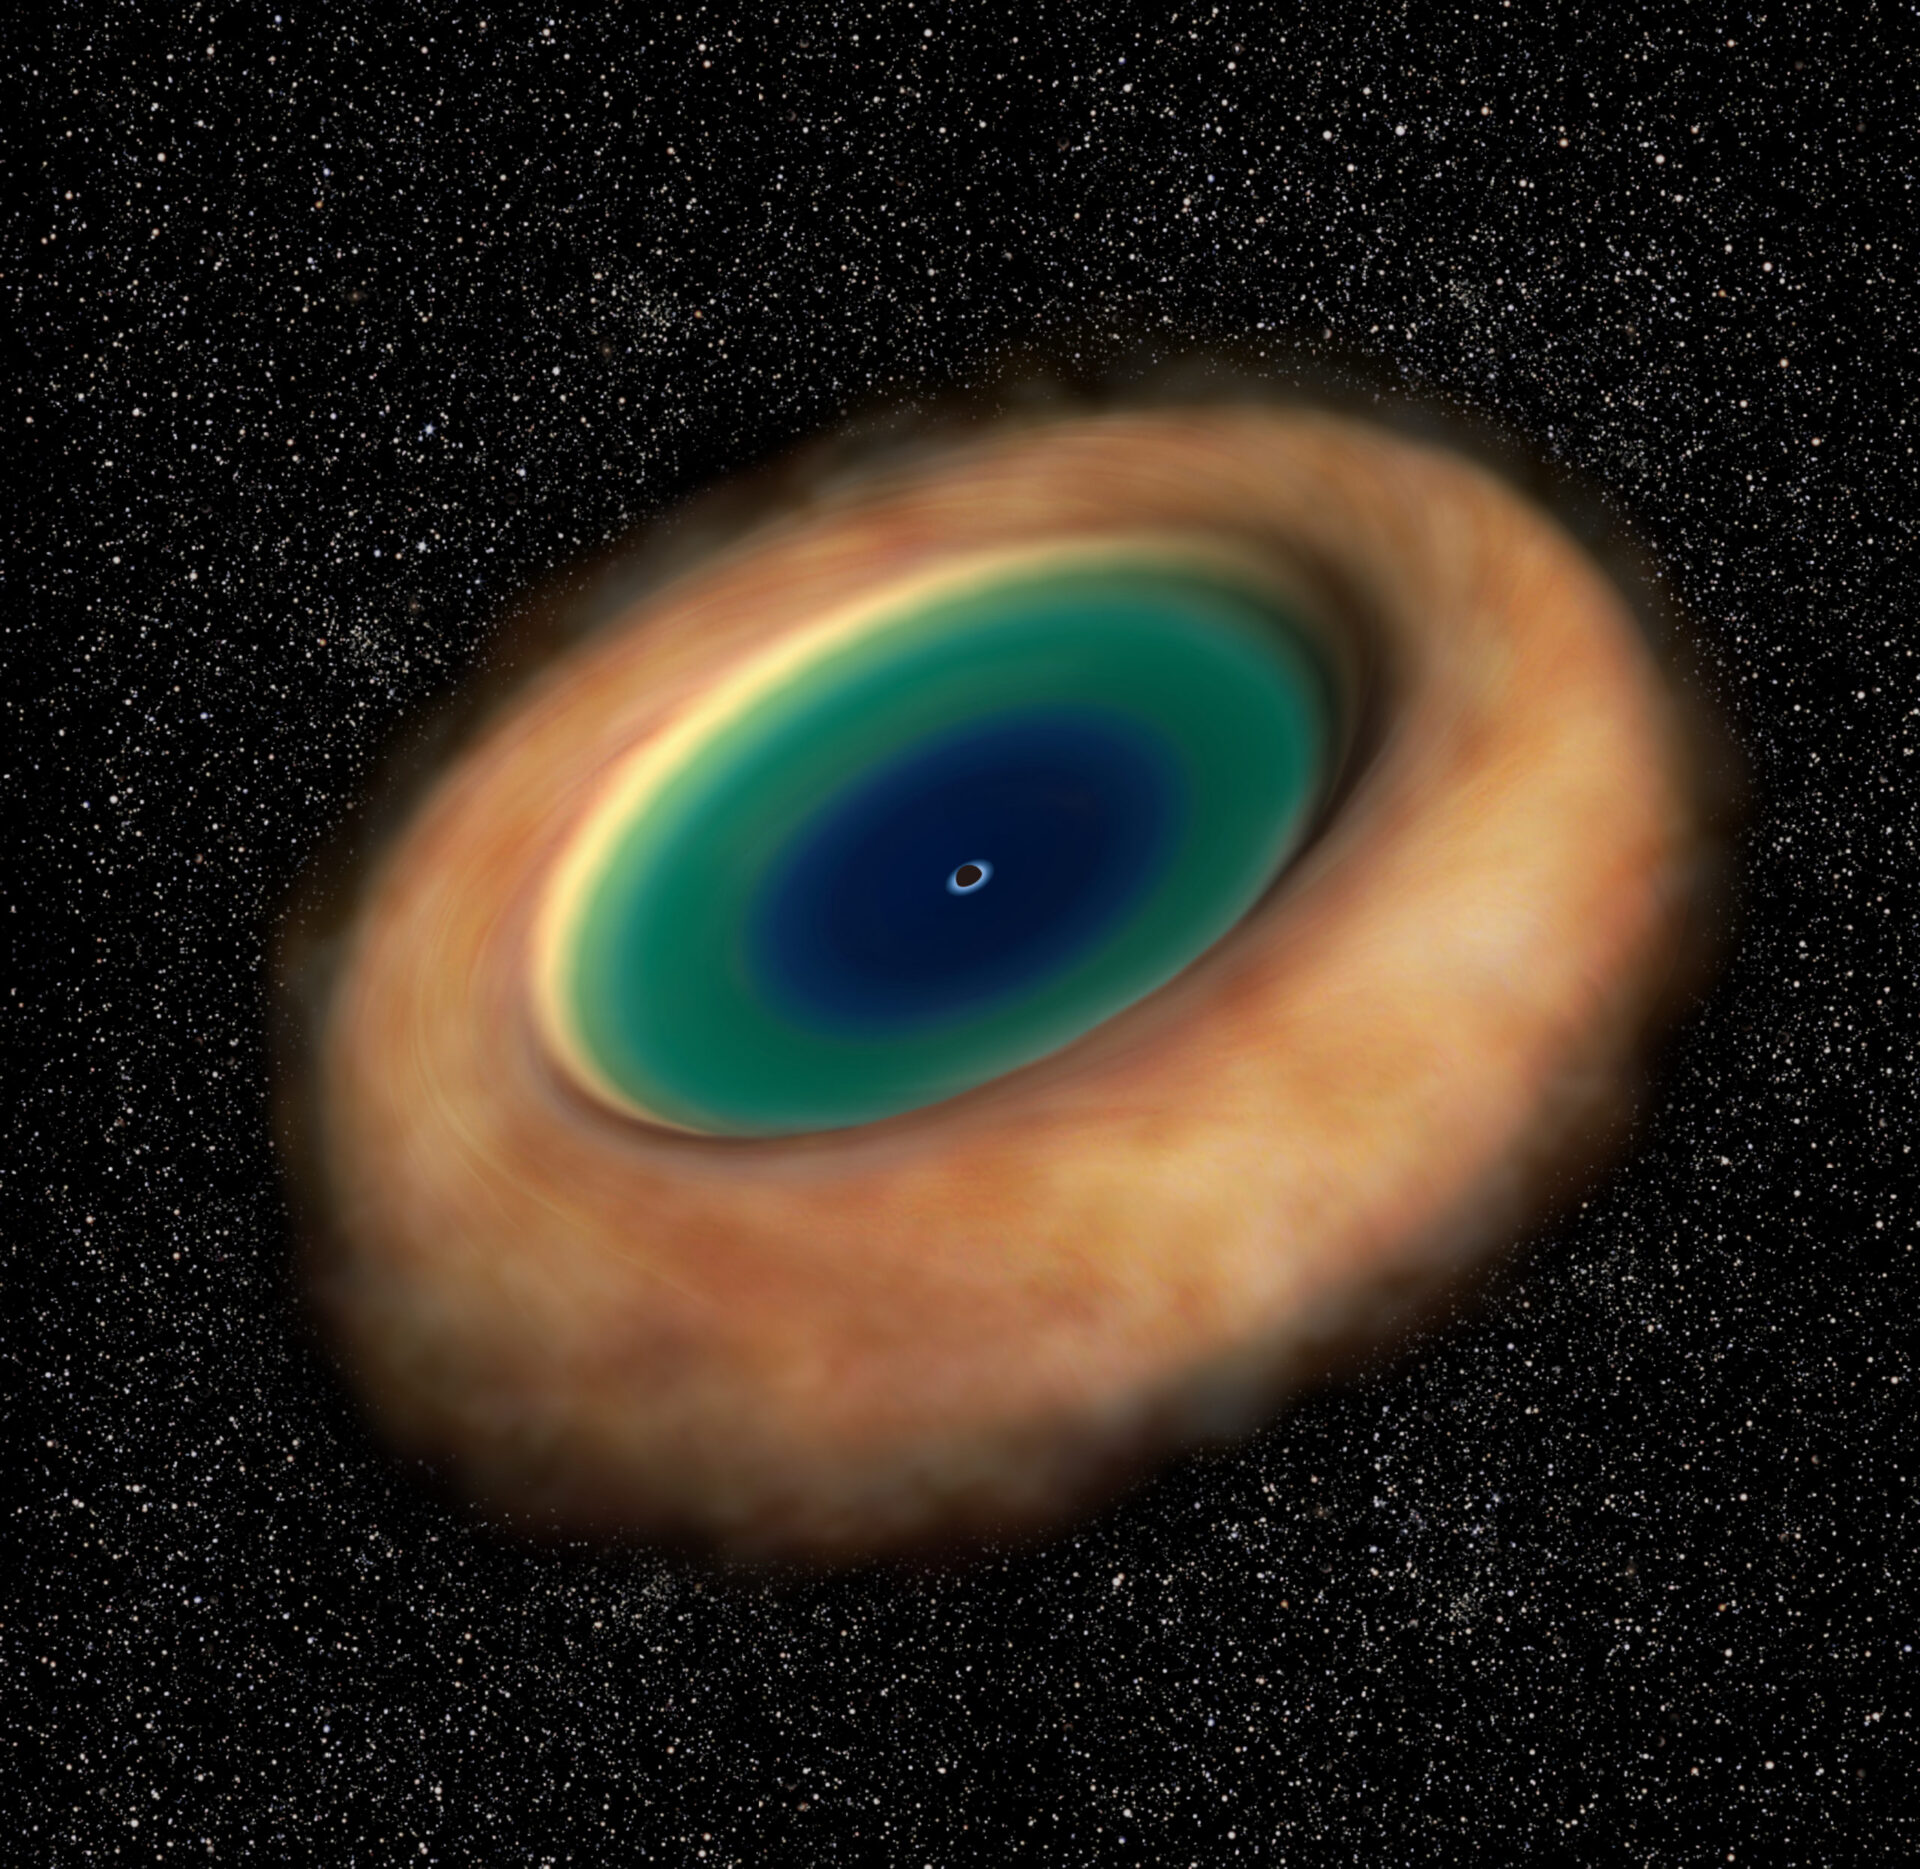 Artist’s impression of the dusty gaseous torus around an active supermassive black hole